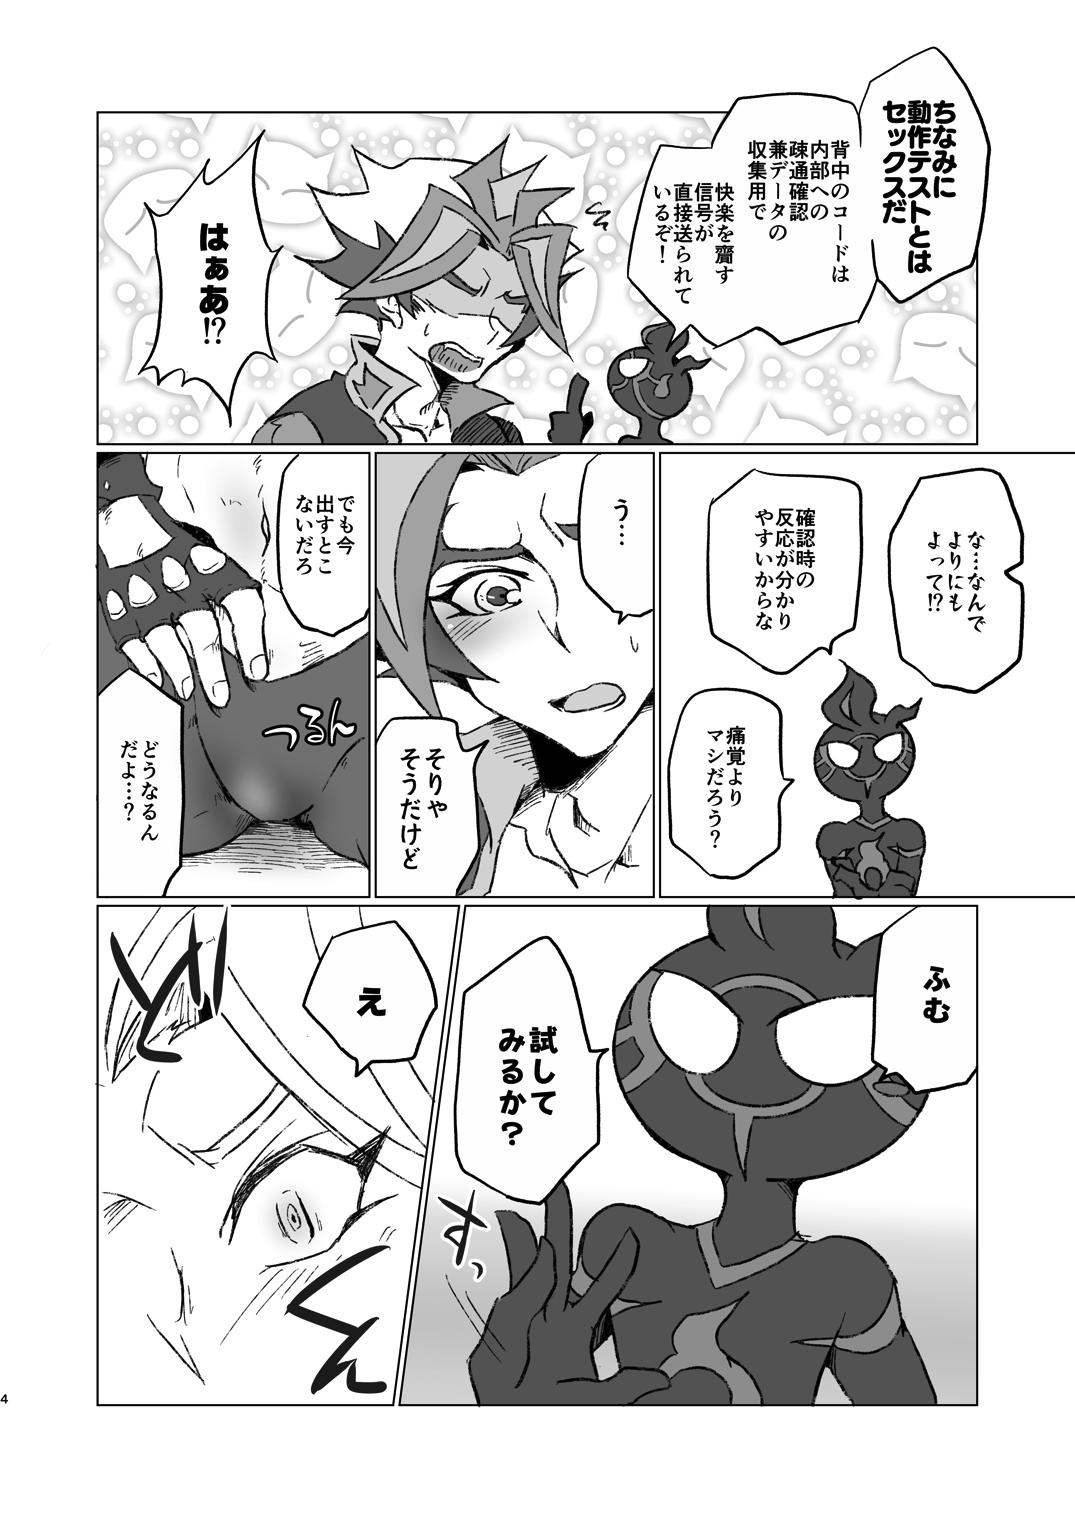 Tia A little bit further - Yu-gi-oh vrains Coeds - Page 3